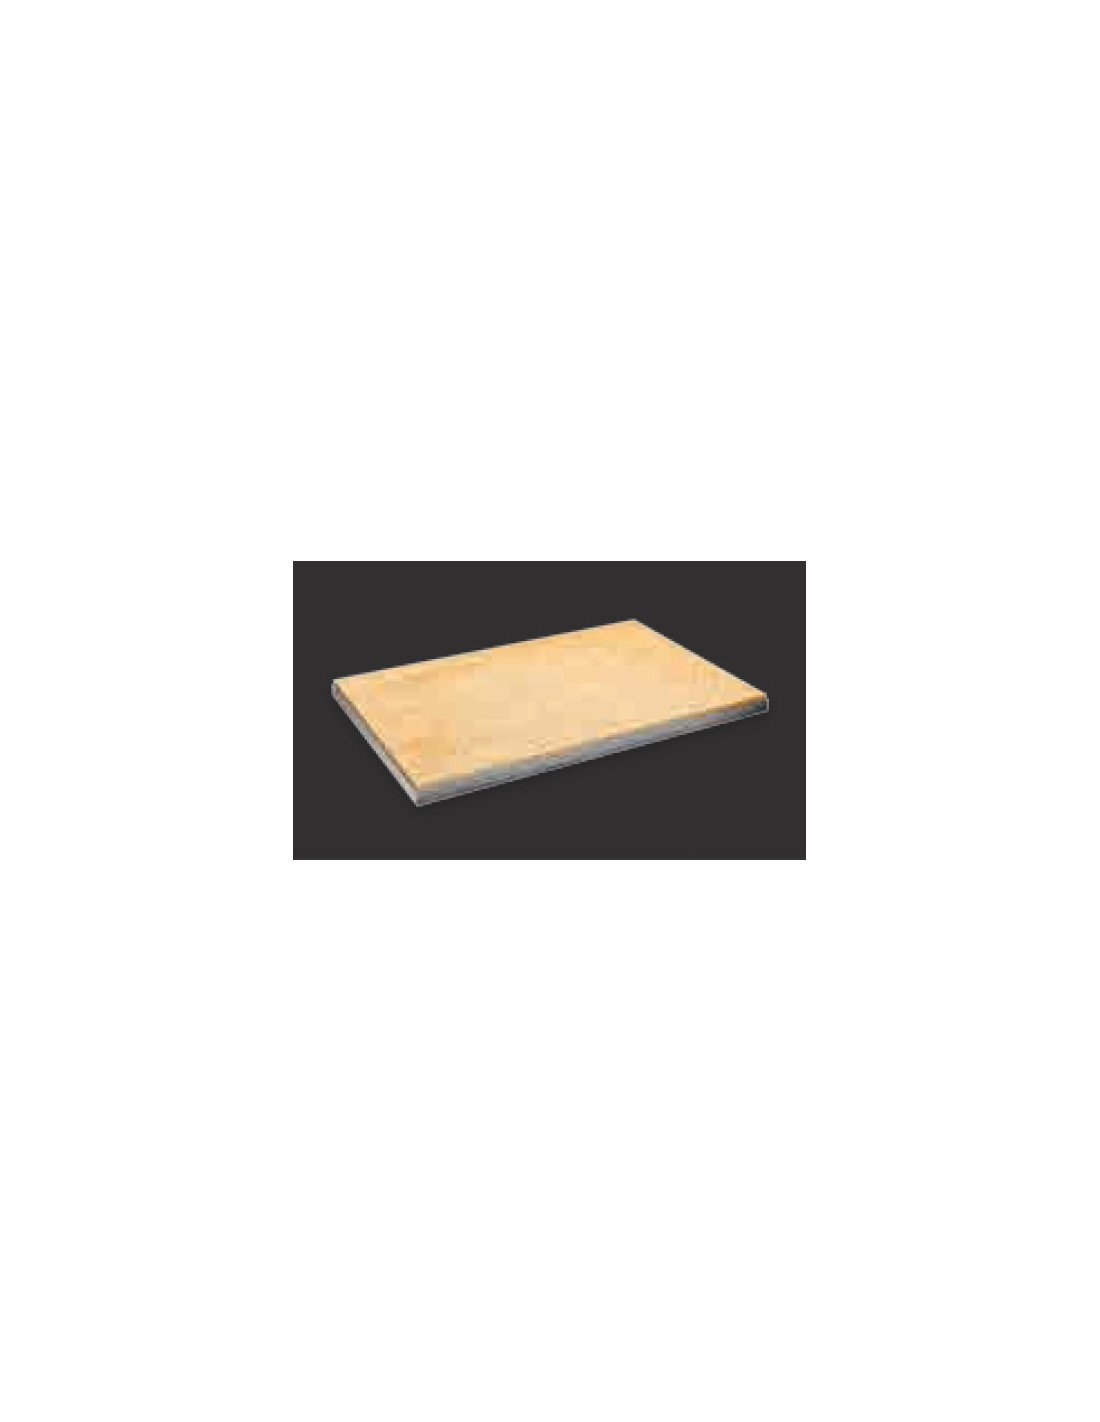 Refractory stone plate - Dimensions 60 x 40 x 1.5 cm h